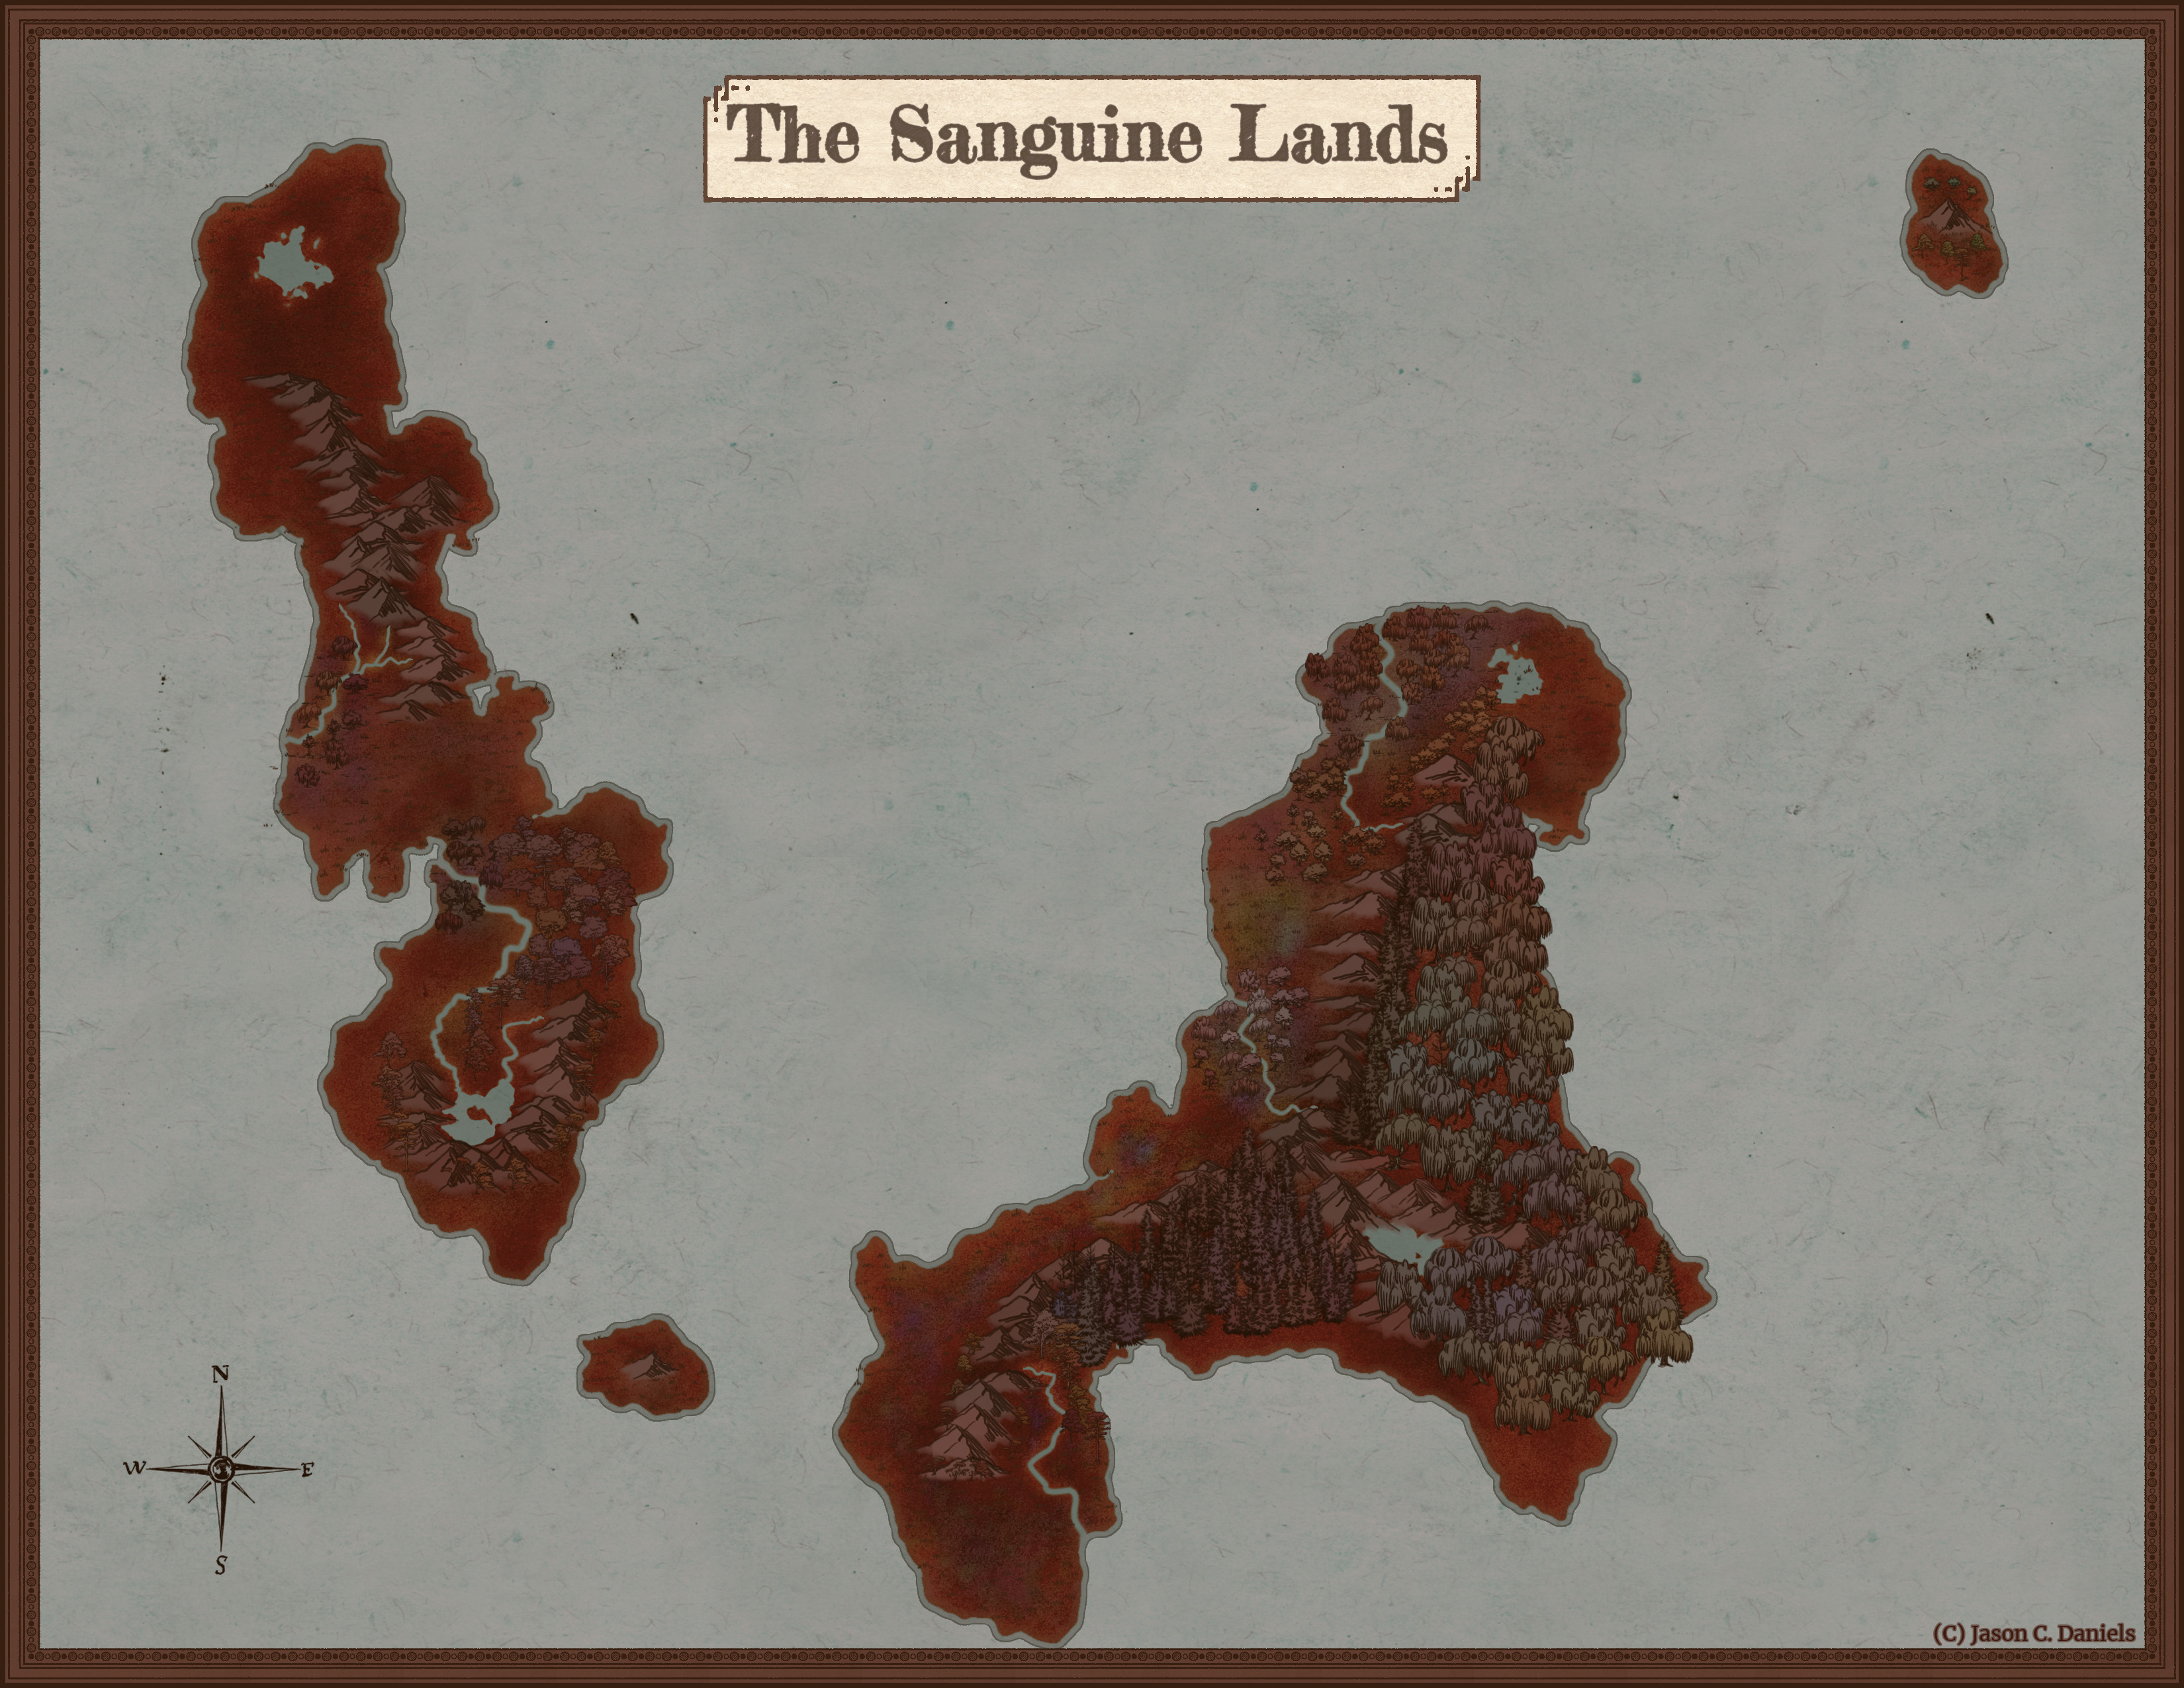 Map of The Sanguine Lands